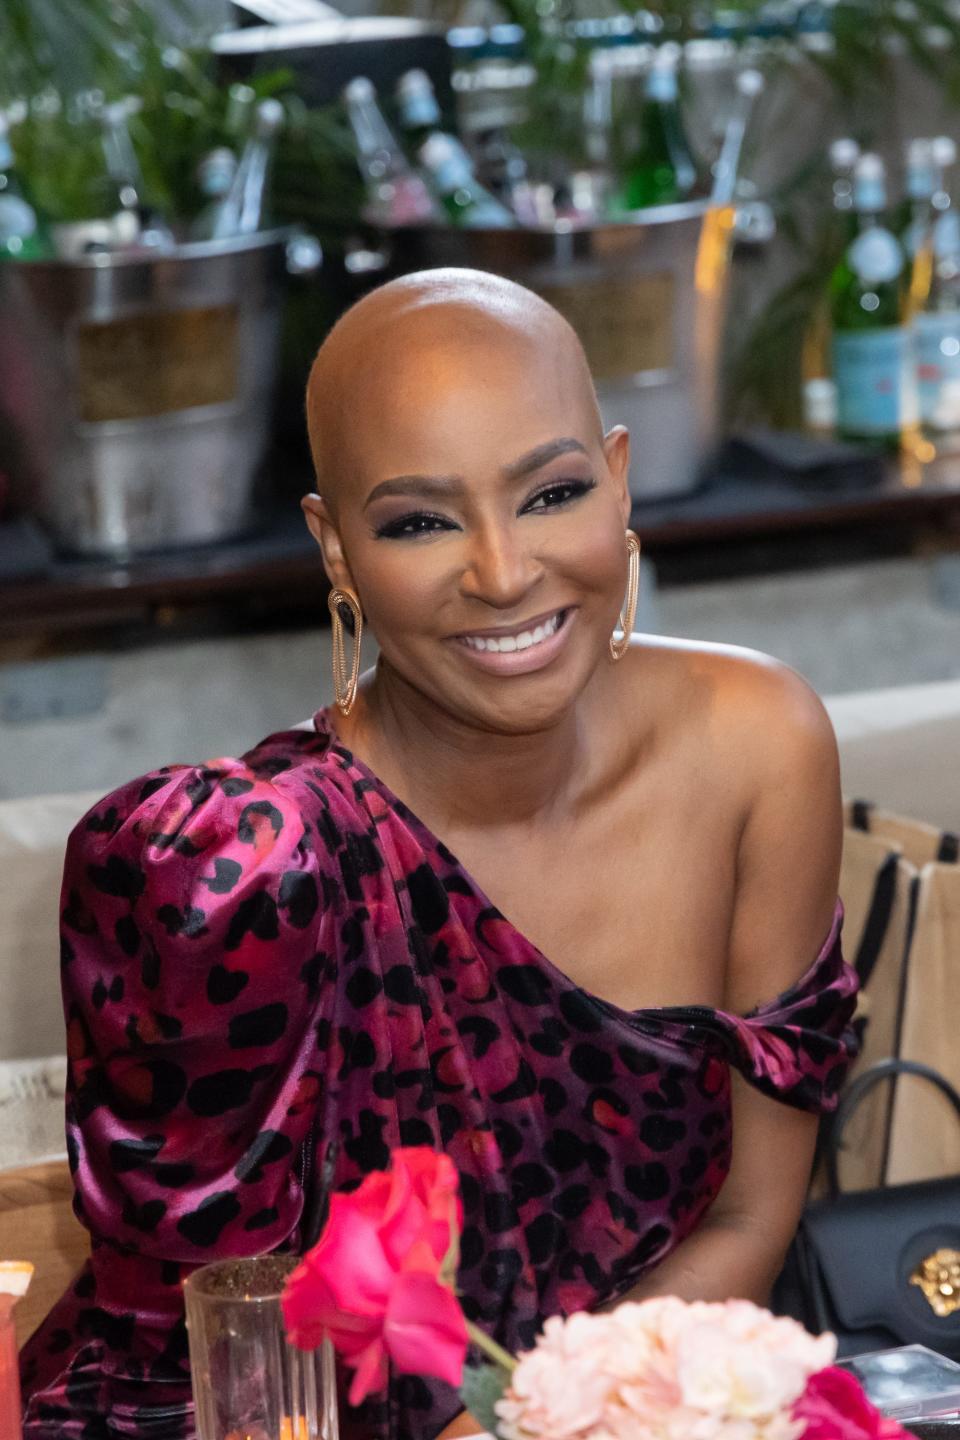 "Real Housewives of Miami" star Guerdy Abraira bravely shares her breast cancer battle on the Bravo series' new season.